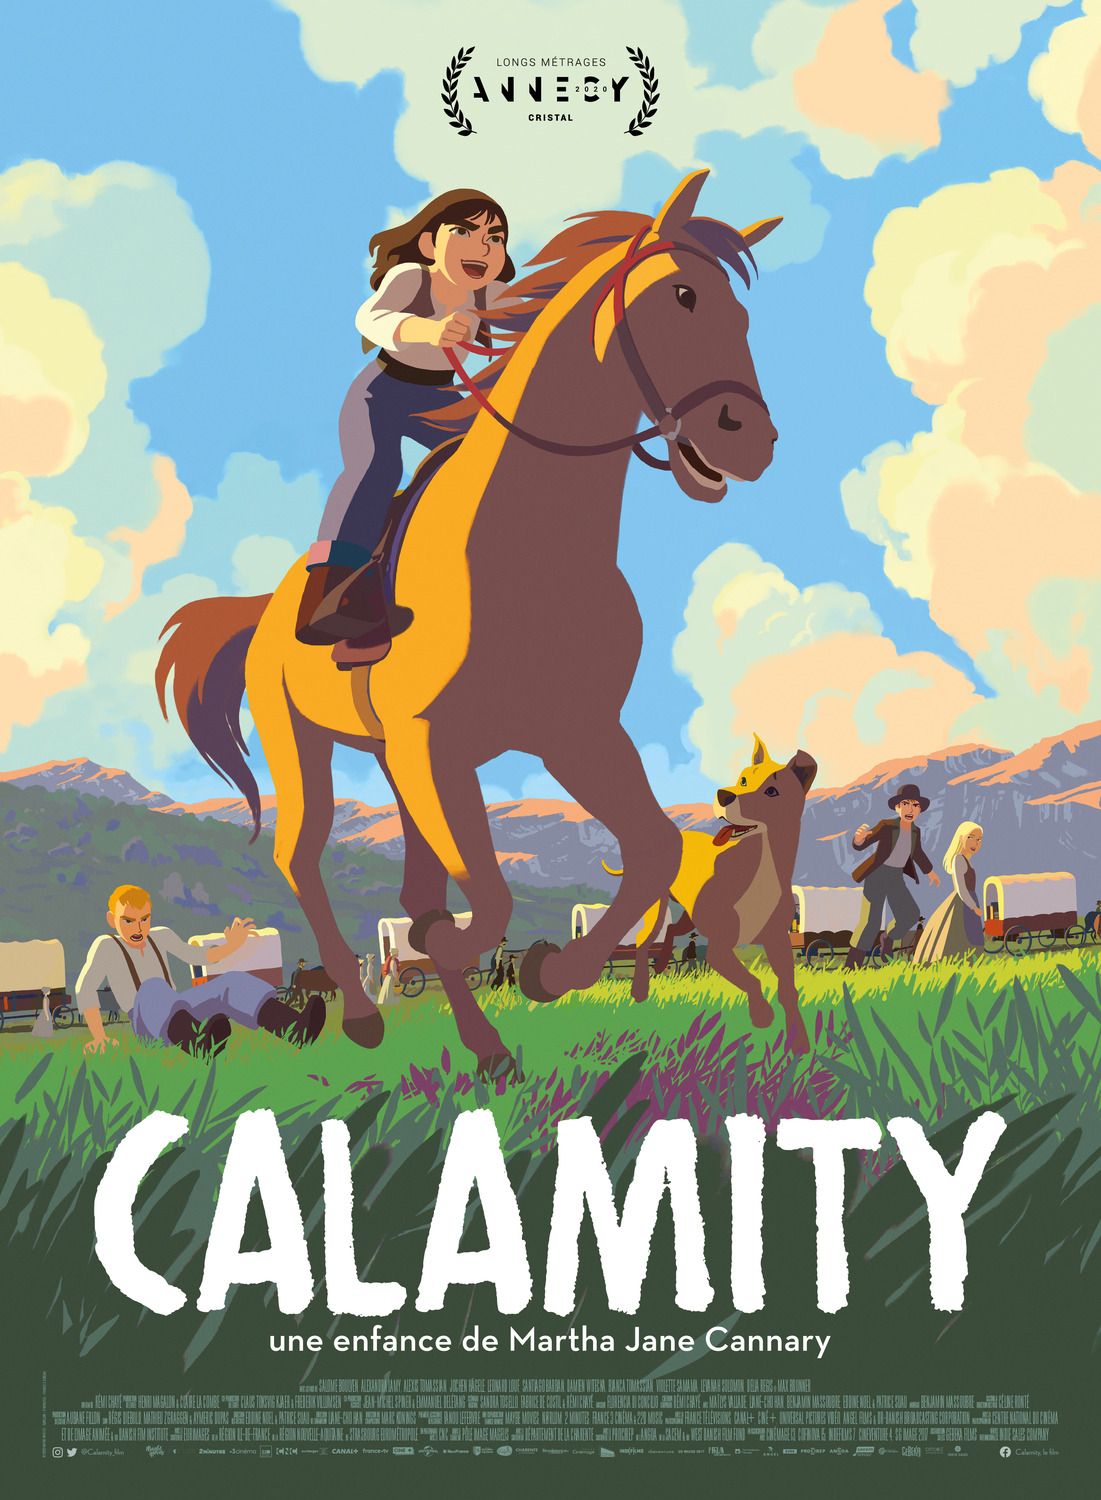 Extra Large Movie Poster Image for Calamity, une enfance de Martha Jane Cannary 